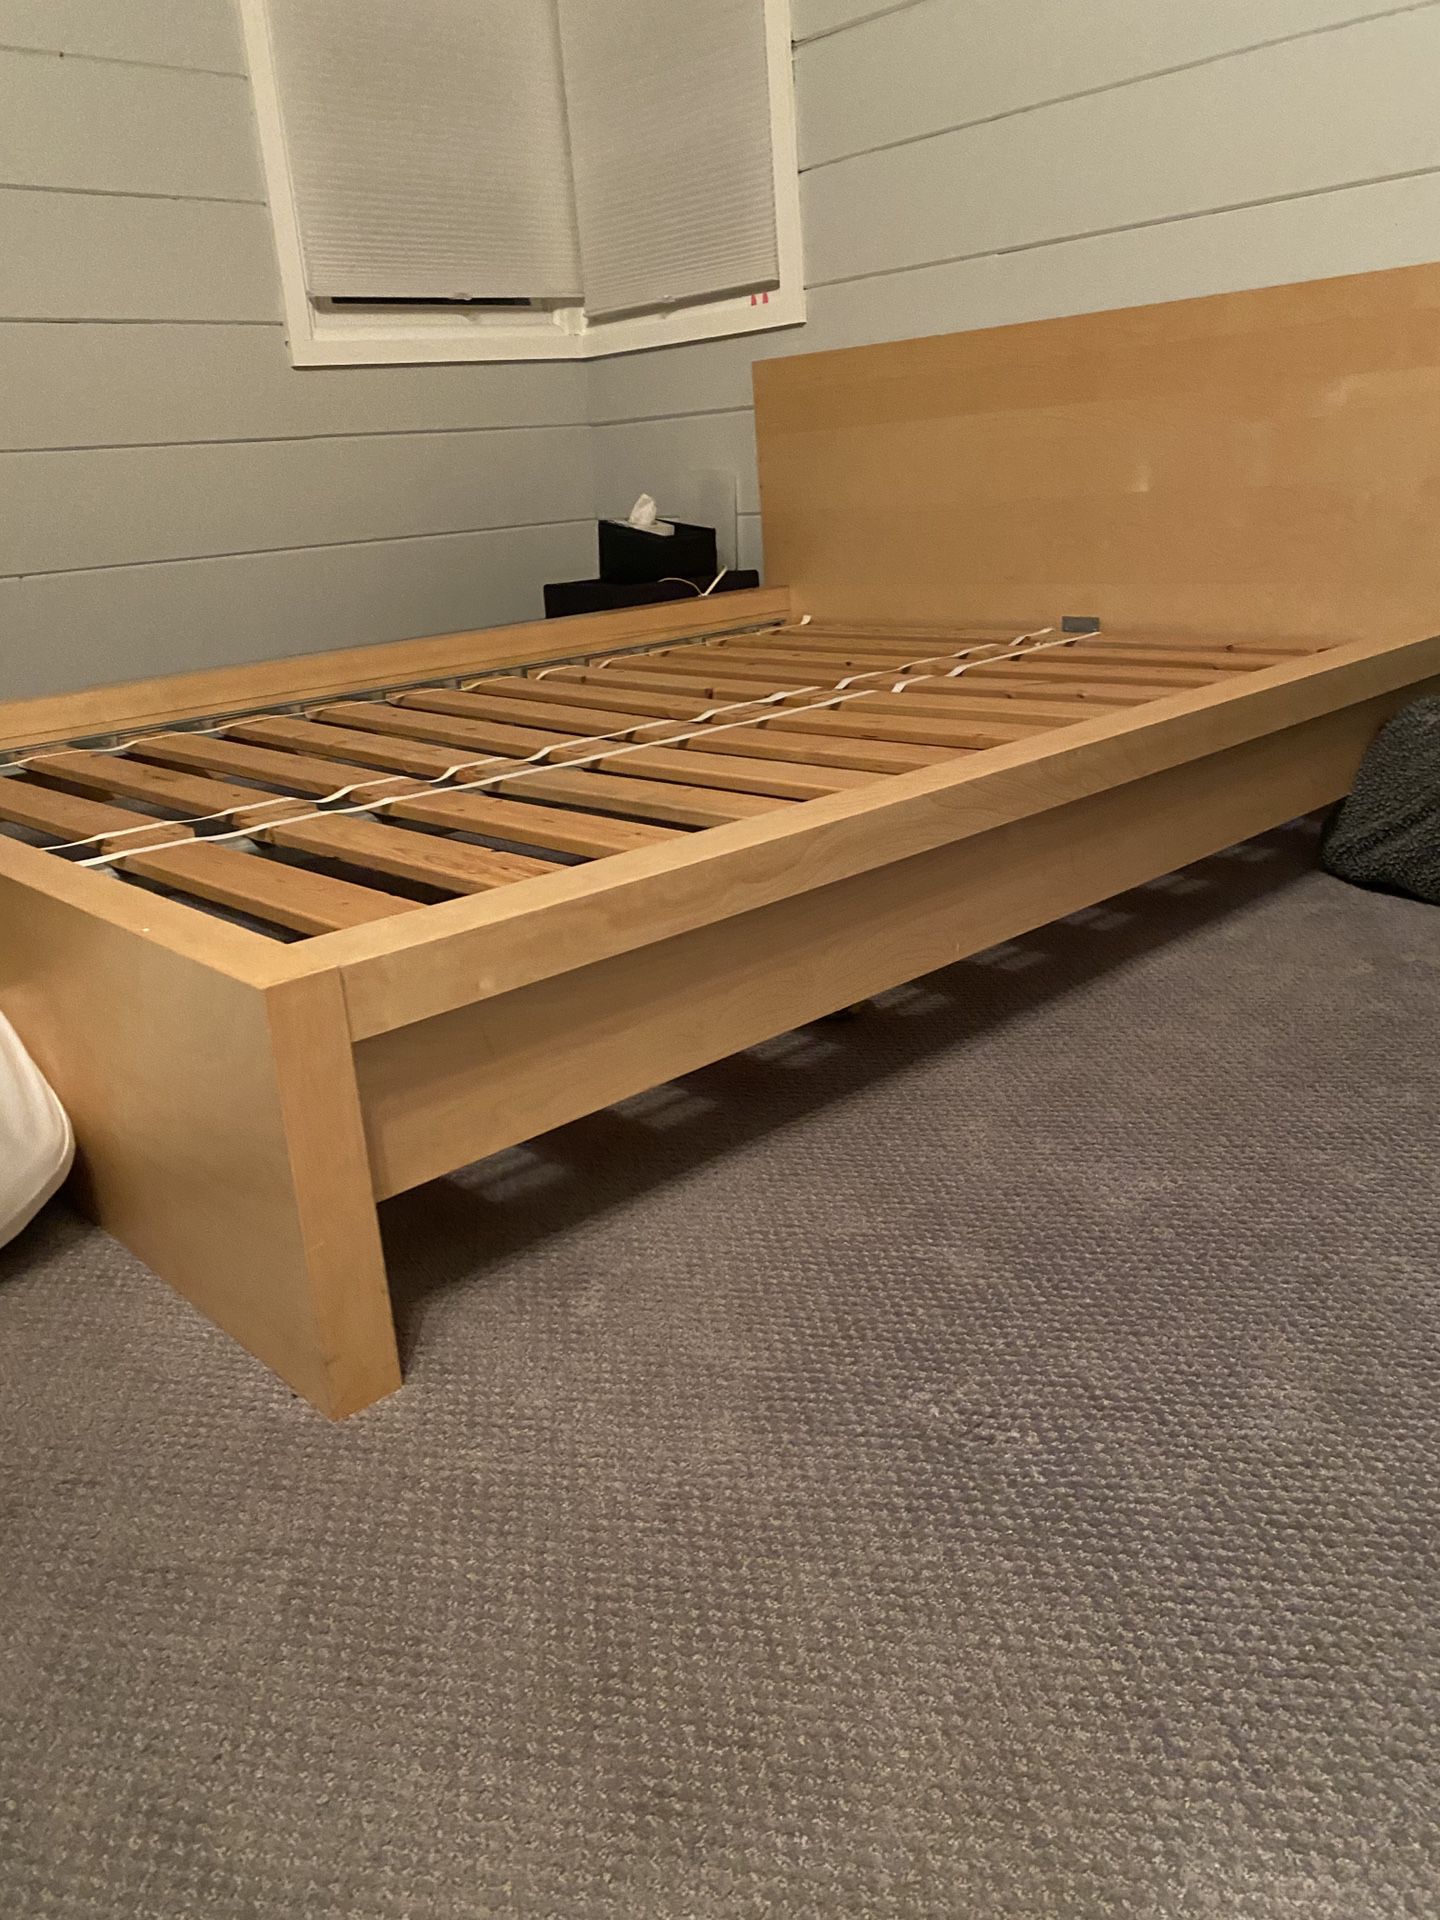 Queen SIze Bed Frame